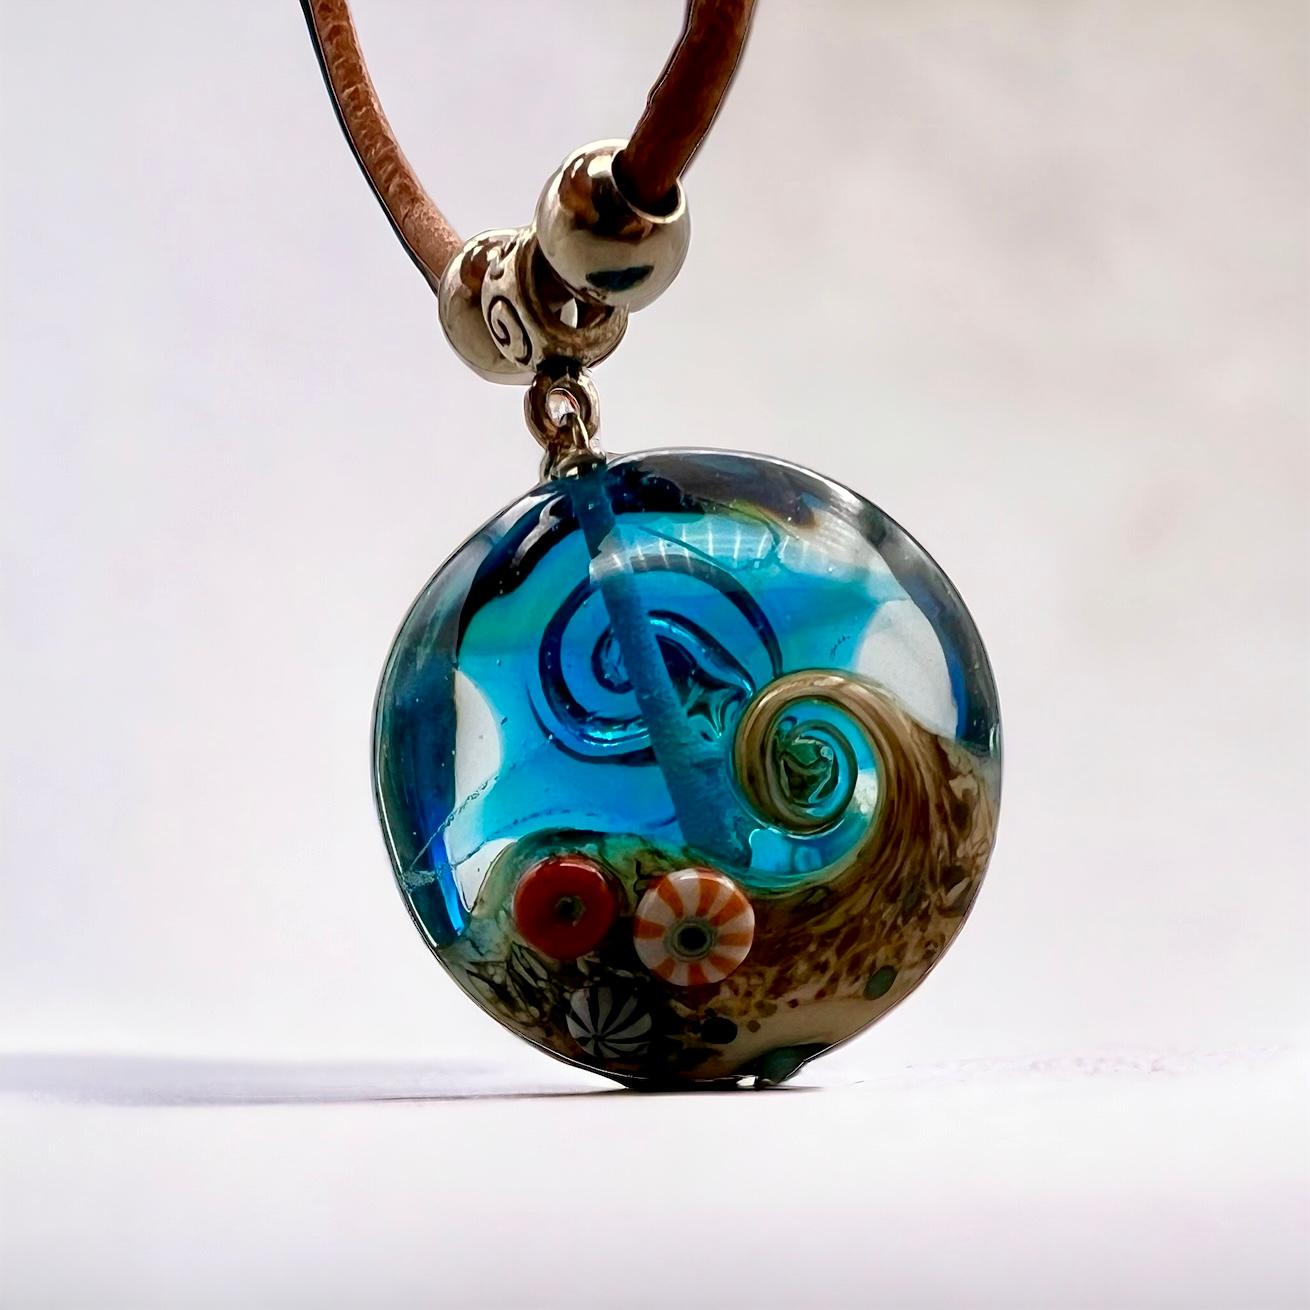 This Murano glass necklace is special due to its intricate craftsmanship and the centuries-old techniques used in its creation. Murano glass is renowned worldwide for its exceptional quality and artistry. Each piece is handcrafted by skilled